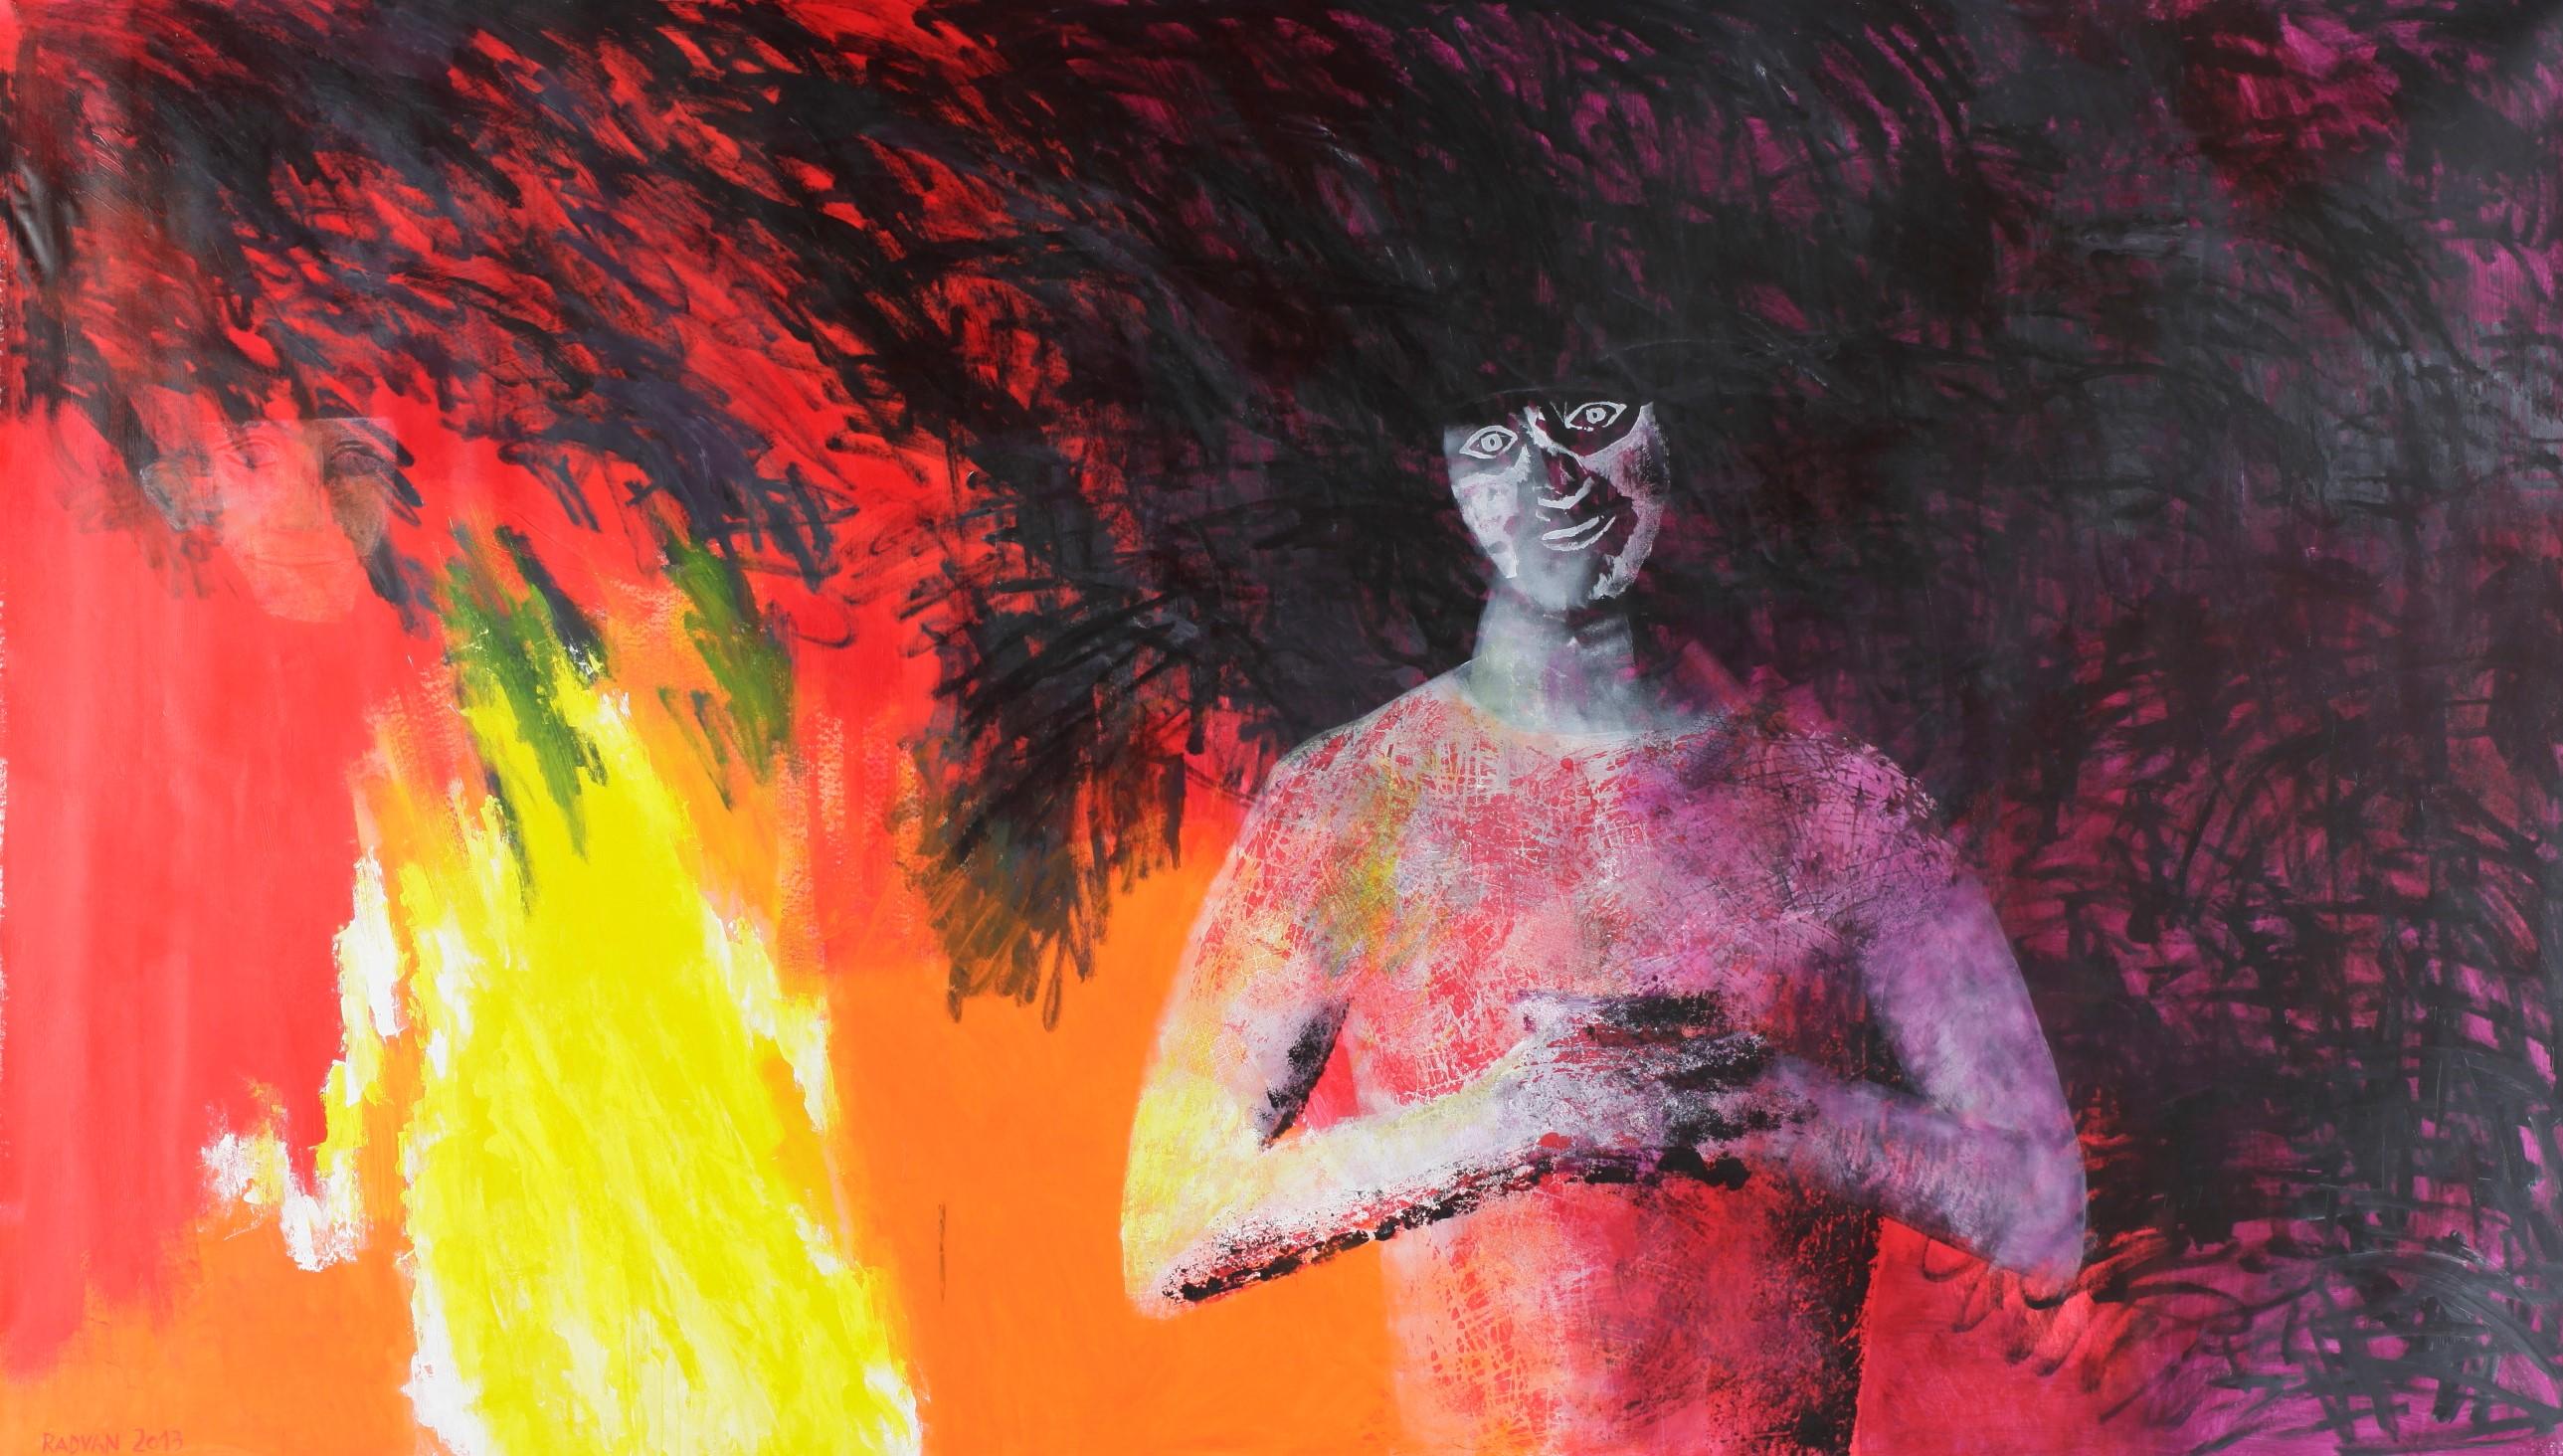 Two Friends - Contemporary, Red, Figurative Painting, 21st Century, Fire, Yellow